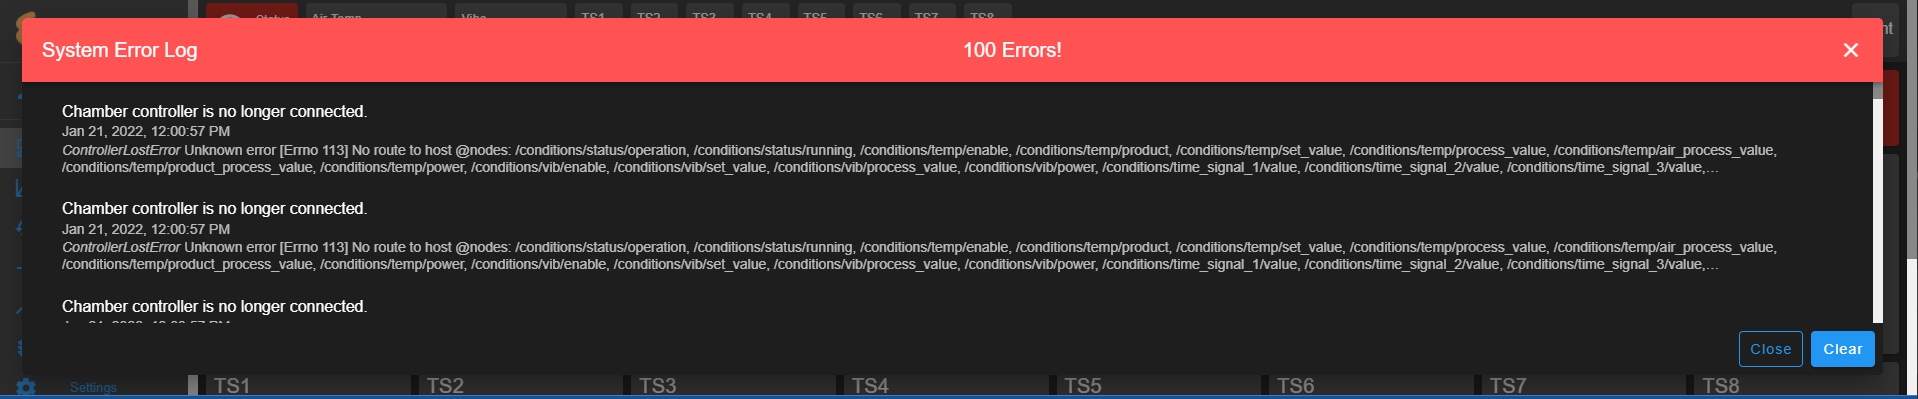 Expanded view of detailed error messages